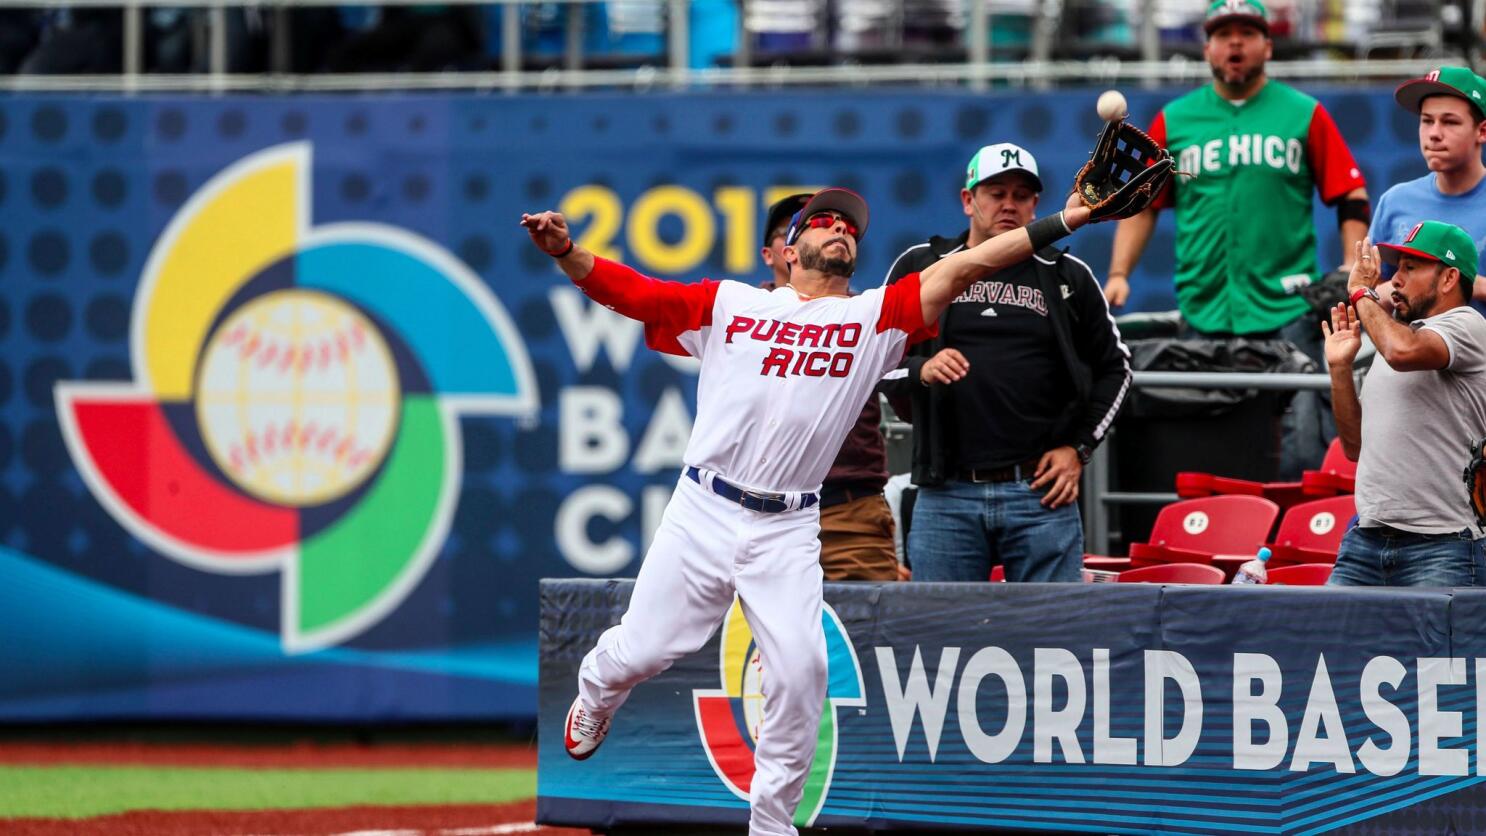 WBC notebook: Puerto Rico roster includes seven players born in